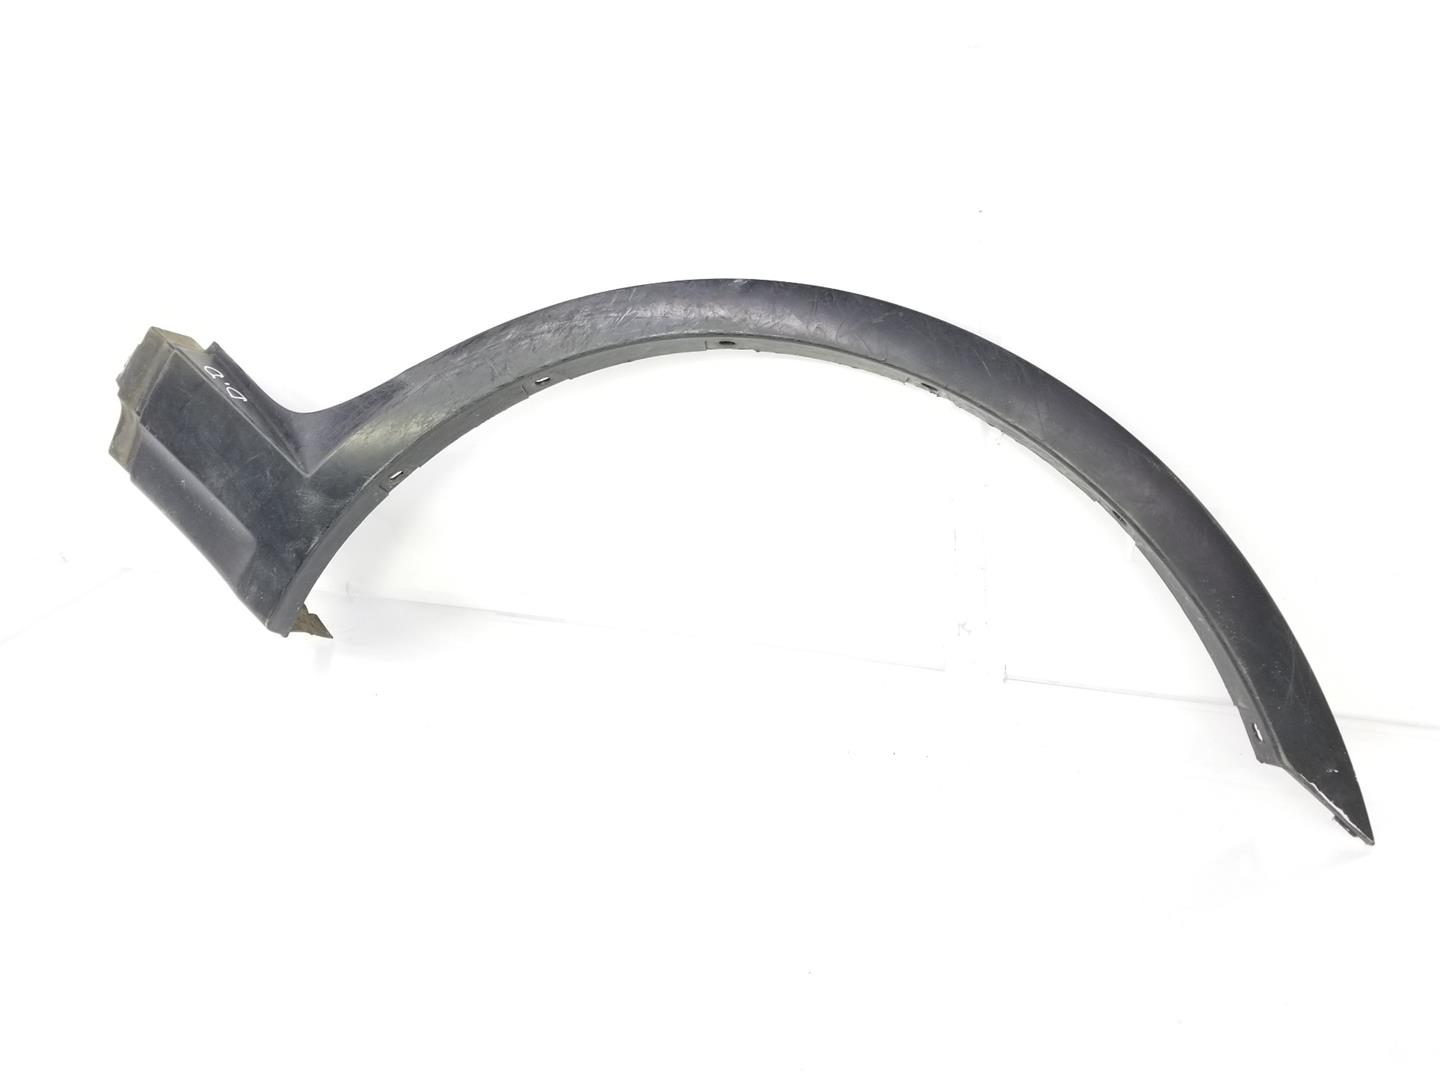 BMW X3 E83 (2003-2010) Front Right Fender Molding 51713405818, 51713405818 19747820